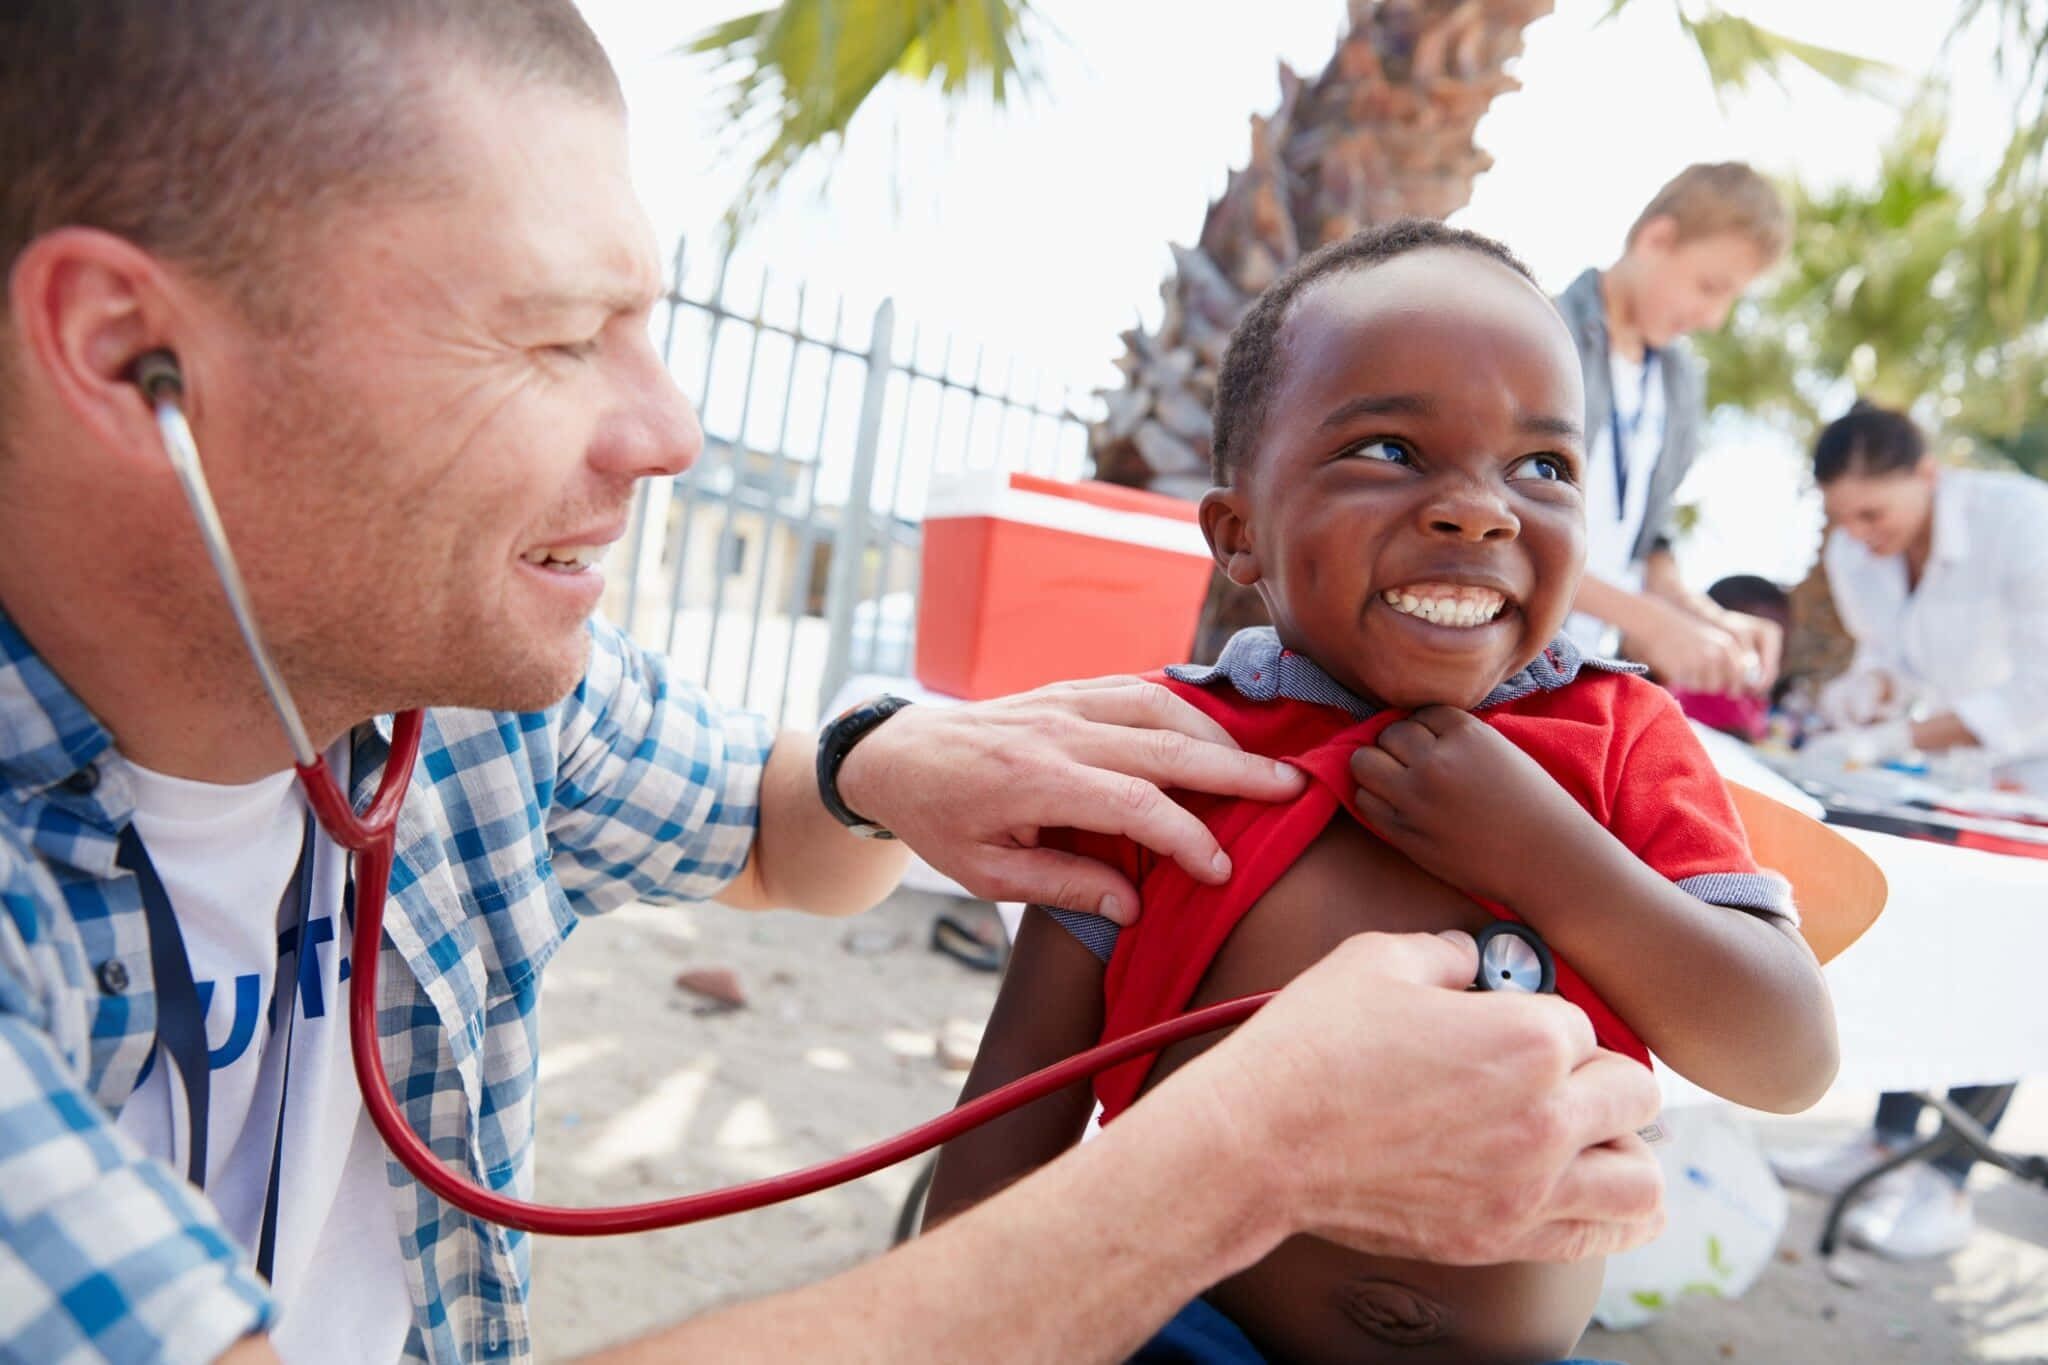 A Man Is Examining A Child With A Stethoscope